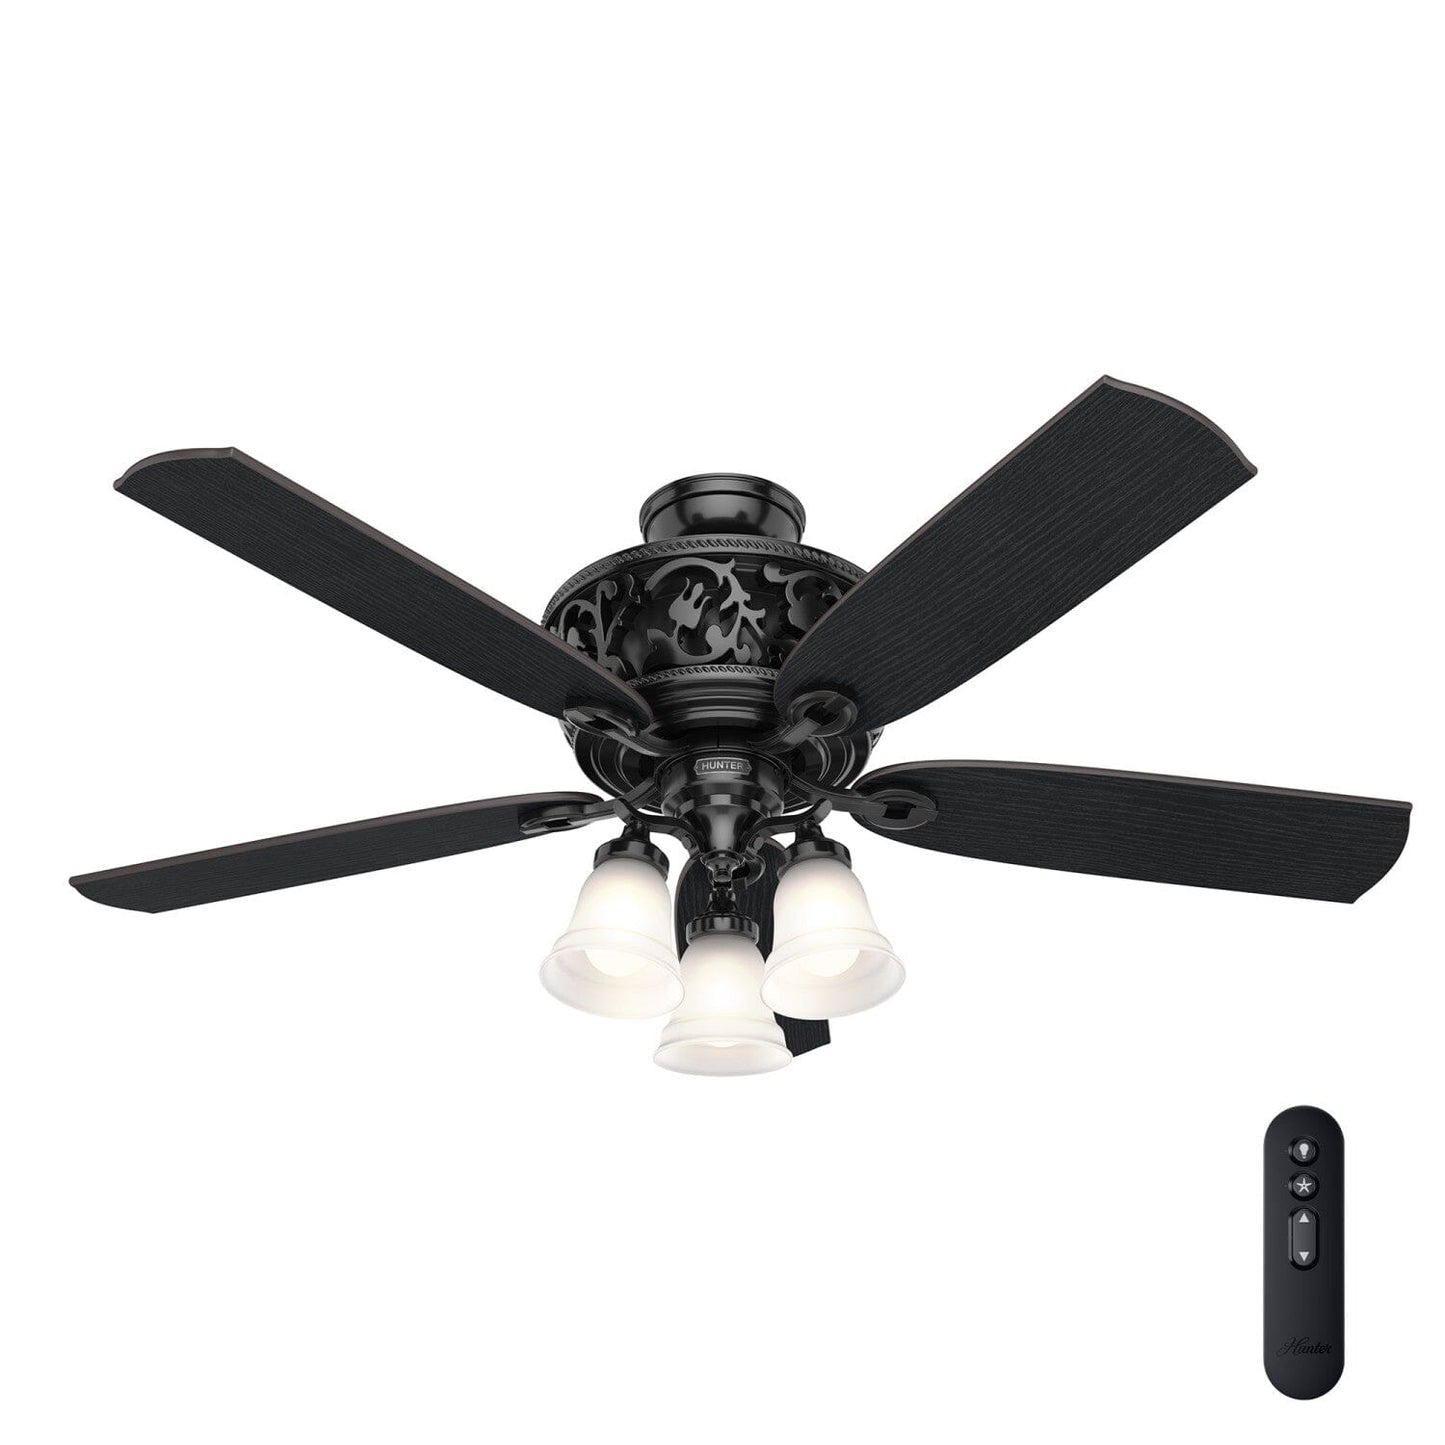 Promenade ENERGY STAR with 3 Lights 54 inch with Remote Ceiling Fans Hunter Gloss Black - Black Oak 